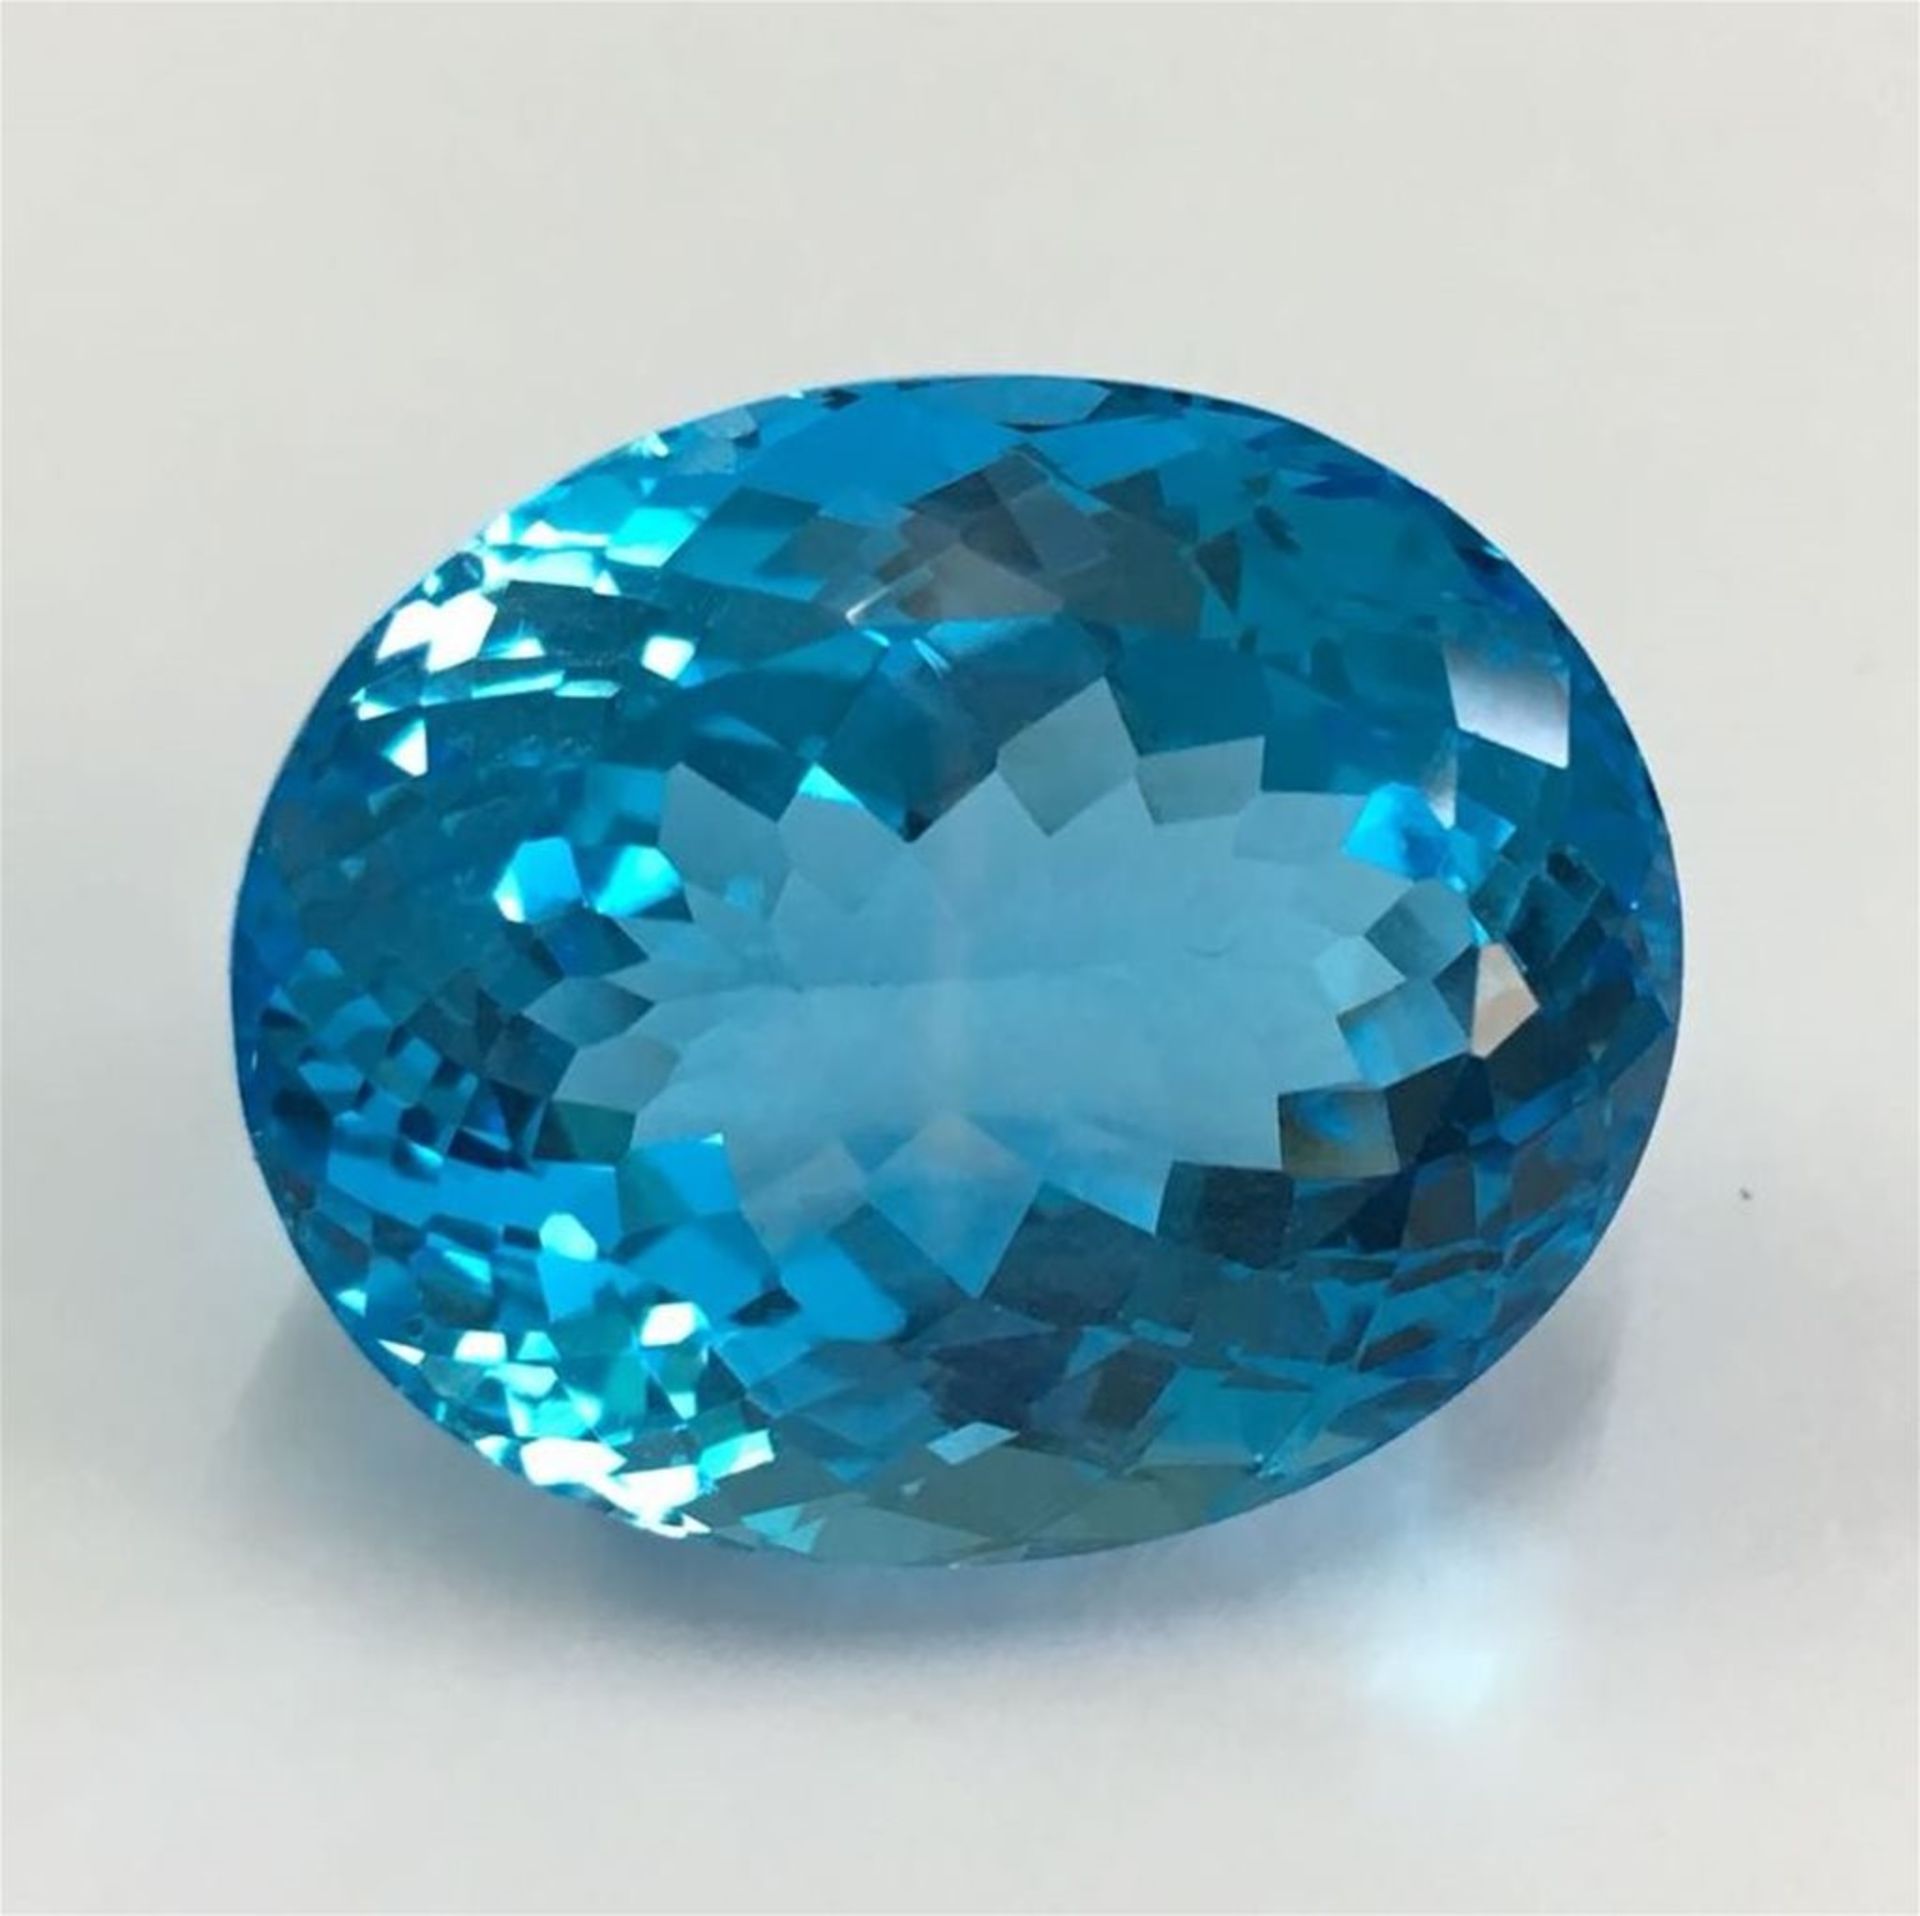 GIA Certified 50.54 ct. Blue Topaz - Image 2 of 7